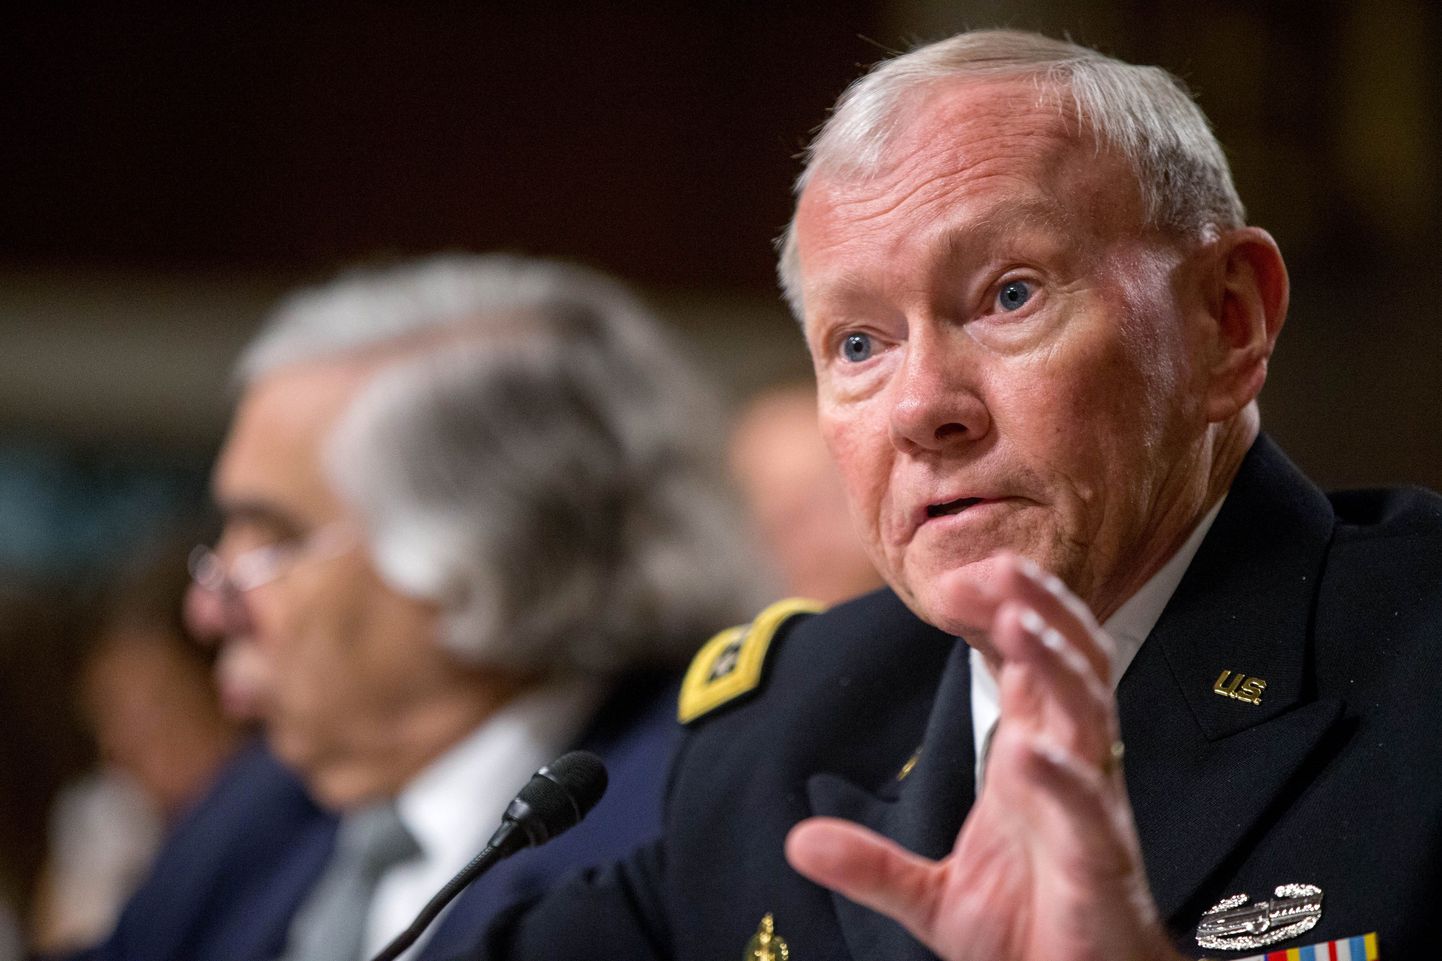 Joint Chiefs Chairman Gen. Martin Dempsey, right, testifies on Capitol Hill in Washington, Wednesday, July 29, 2015, before the Senate Armed Services Committee hearing on the impacts of the Joint Comprehensive Plan of Action (JCPOA) on U.S. Interests and the Military Balance in the Middle East. Energy Secretary Ernest Moniz is at left. (AP Photo/Andrew Harnik)